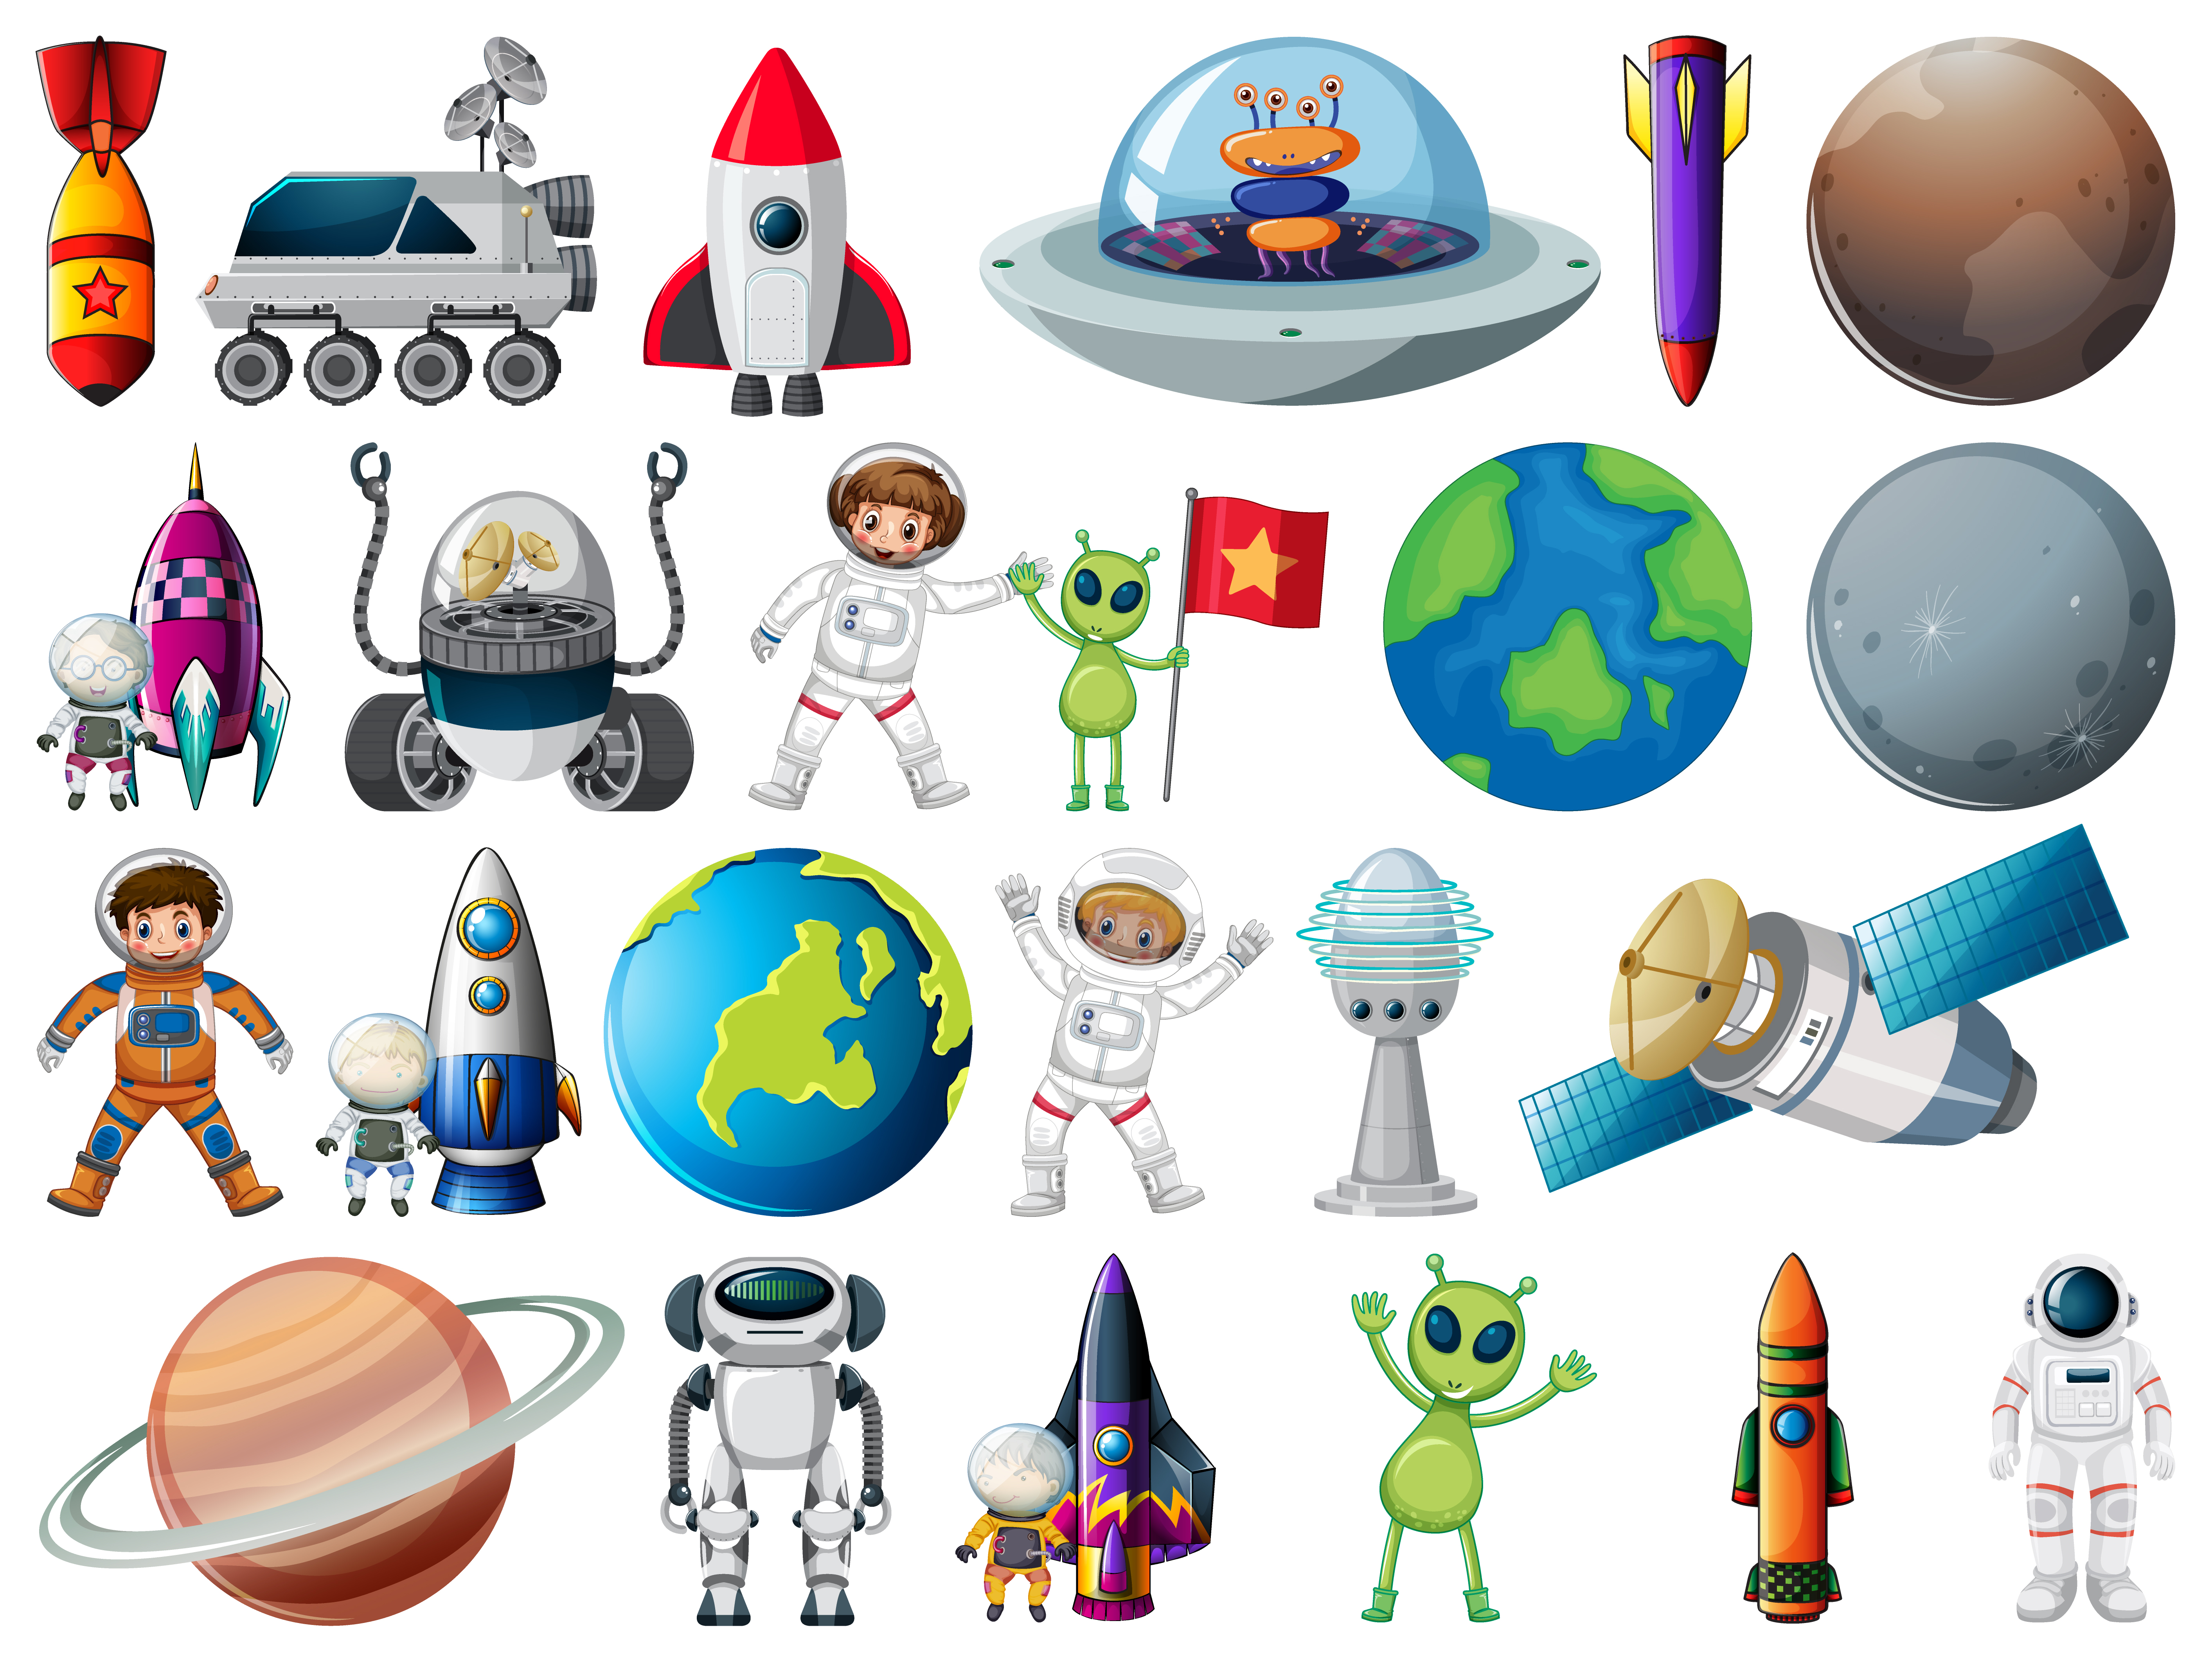 Premium Vector  Set of space objects in space